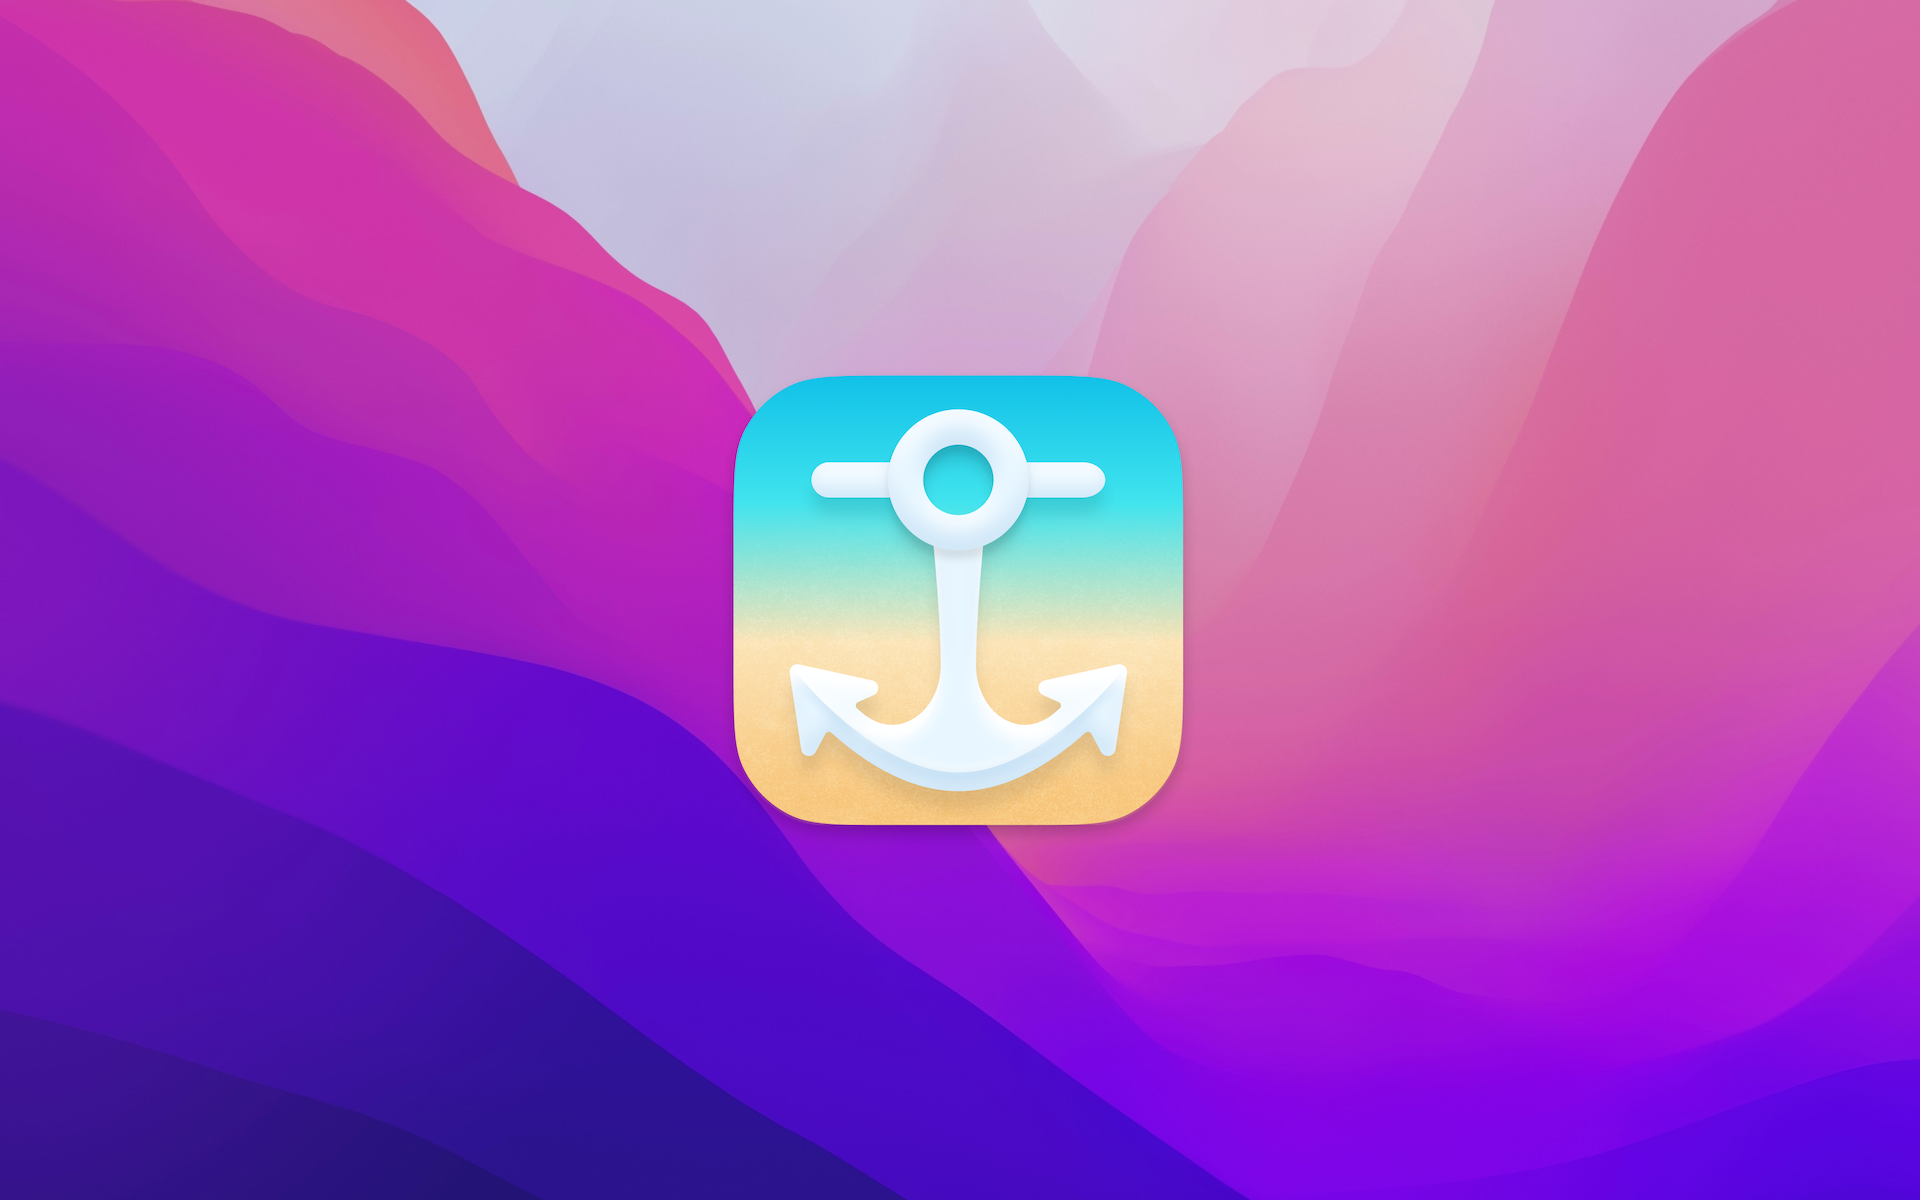 Shiplog's app icon (a white anchor on top of a blue-to-yellow gradient), displayed on top of the macOS Monterey background.